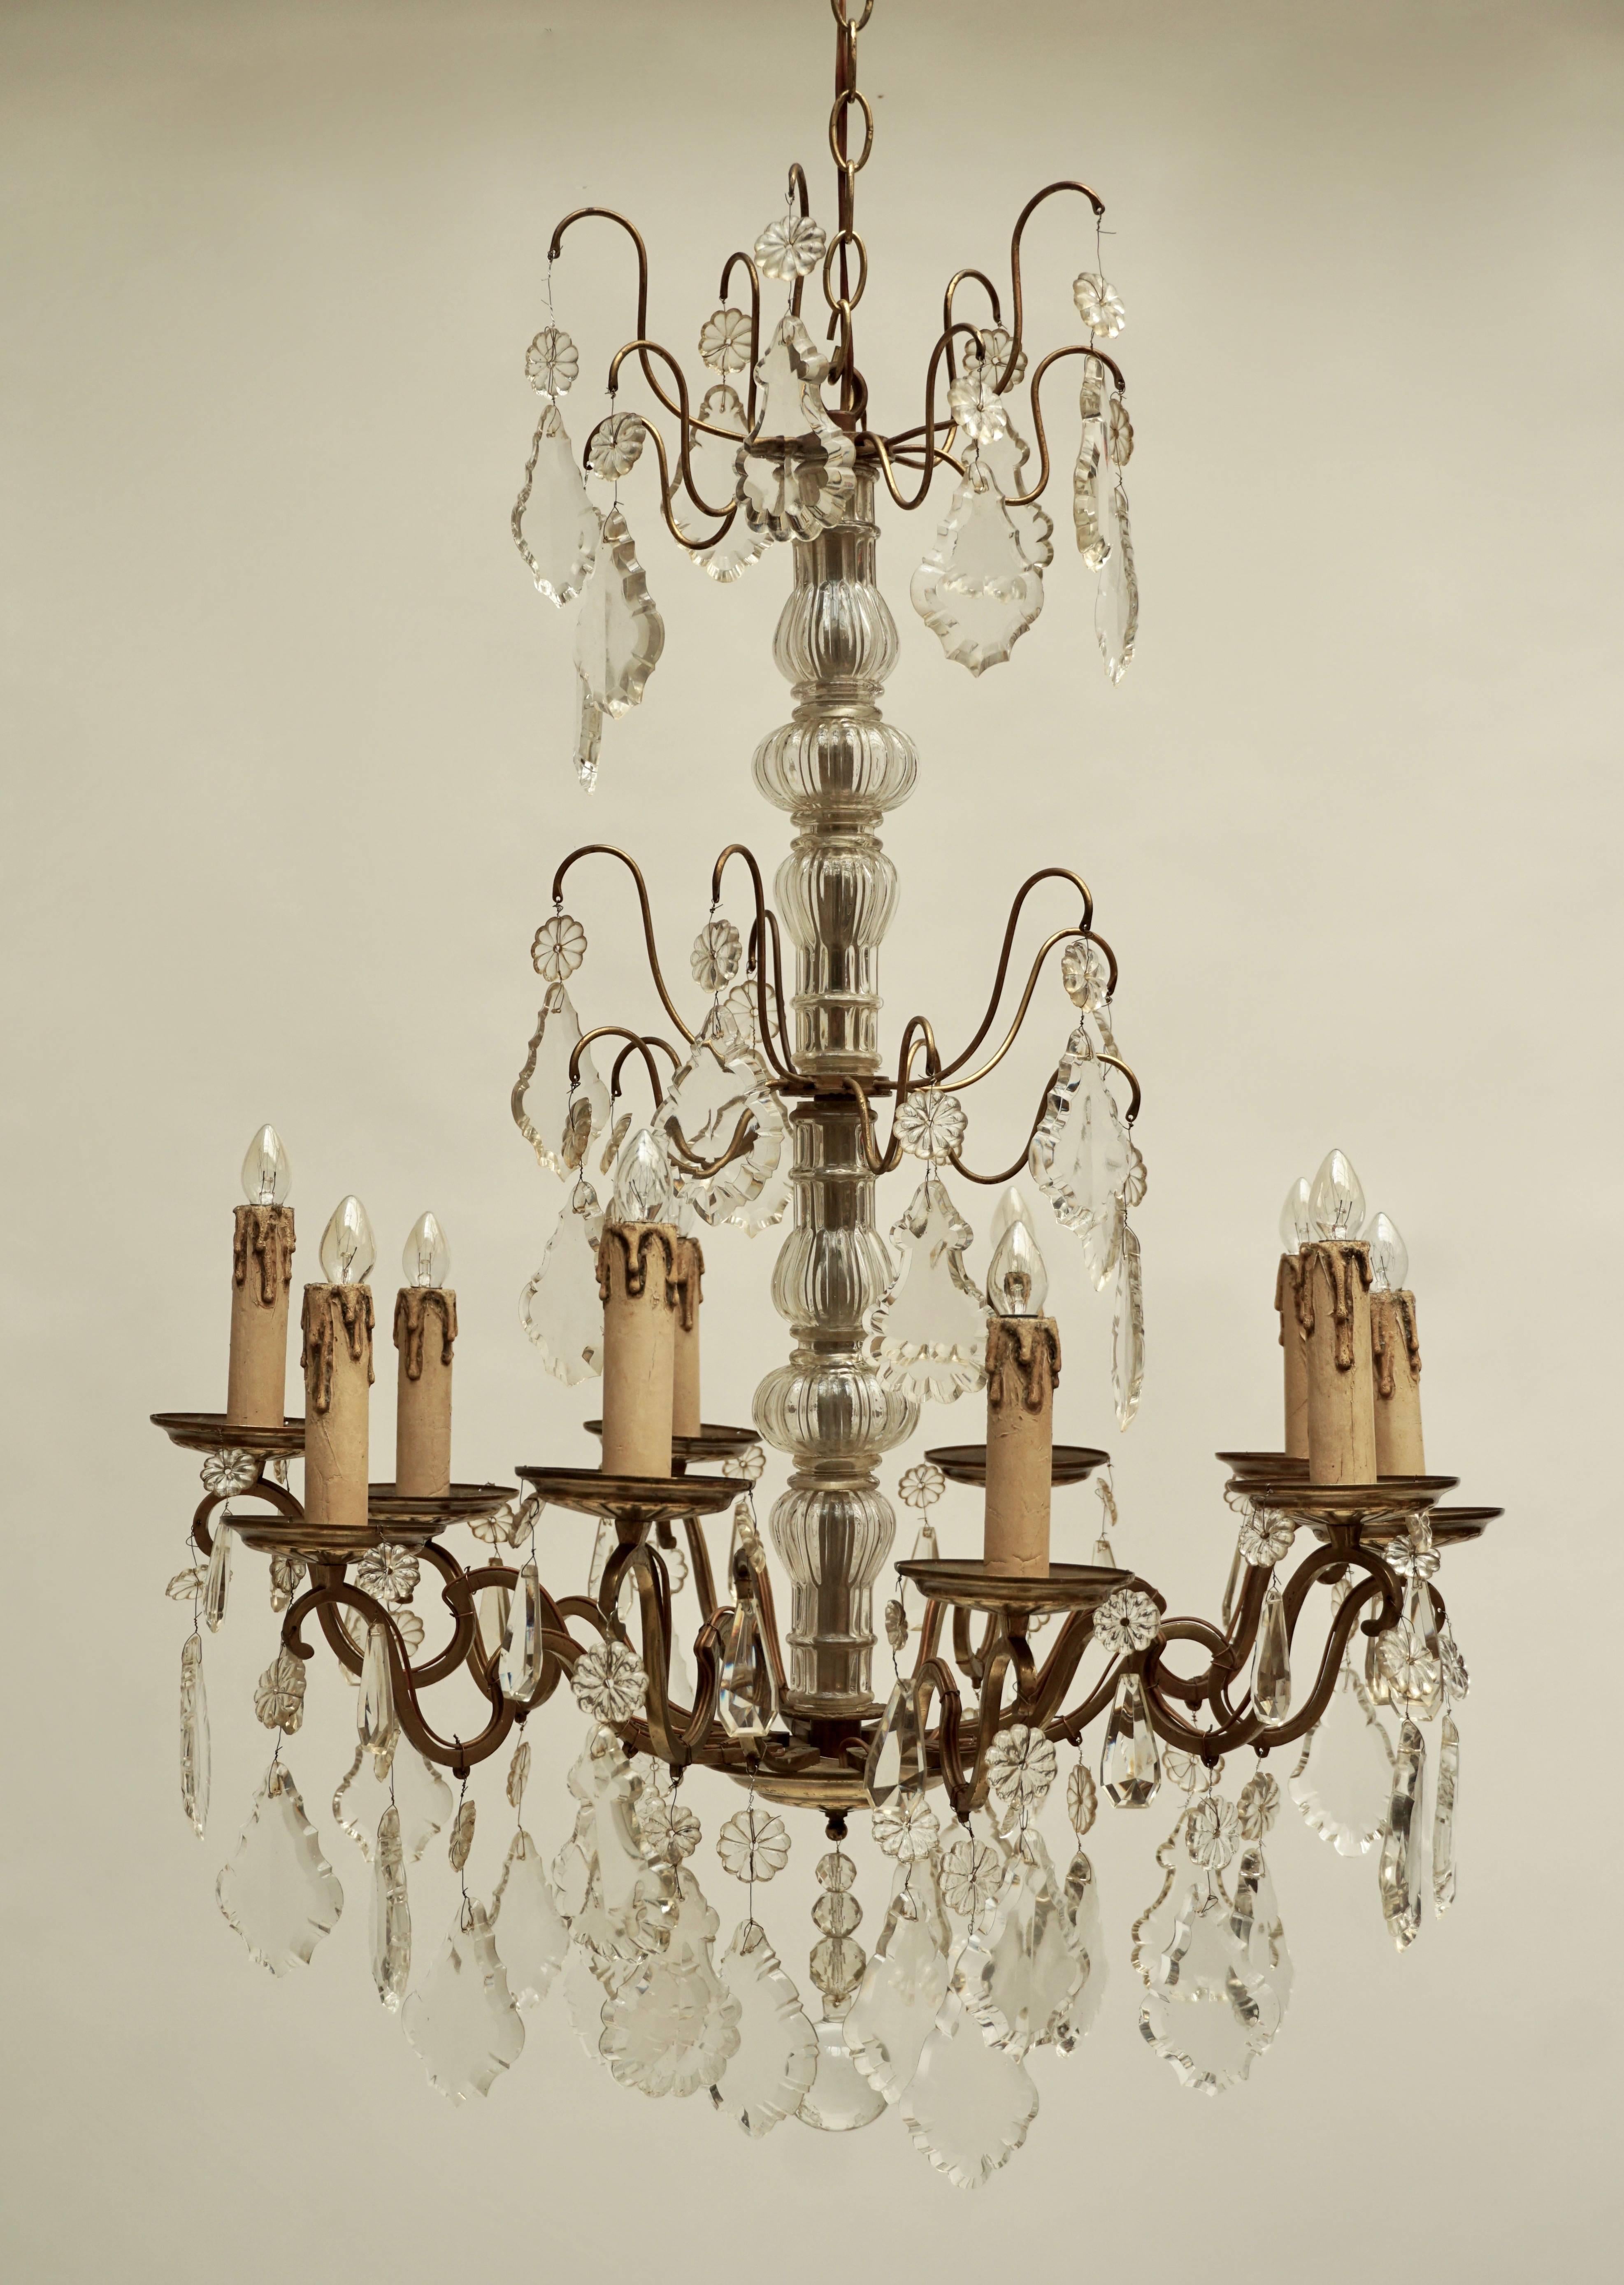 Brass and cristal glass chandelier with tem arms.
Height fixture:83 cm.
Total height with the chain:112 cm.
Diameter:60 cm.
Ten E14 bulbs.